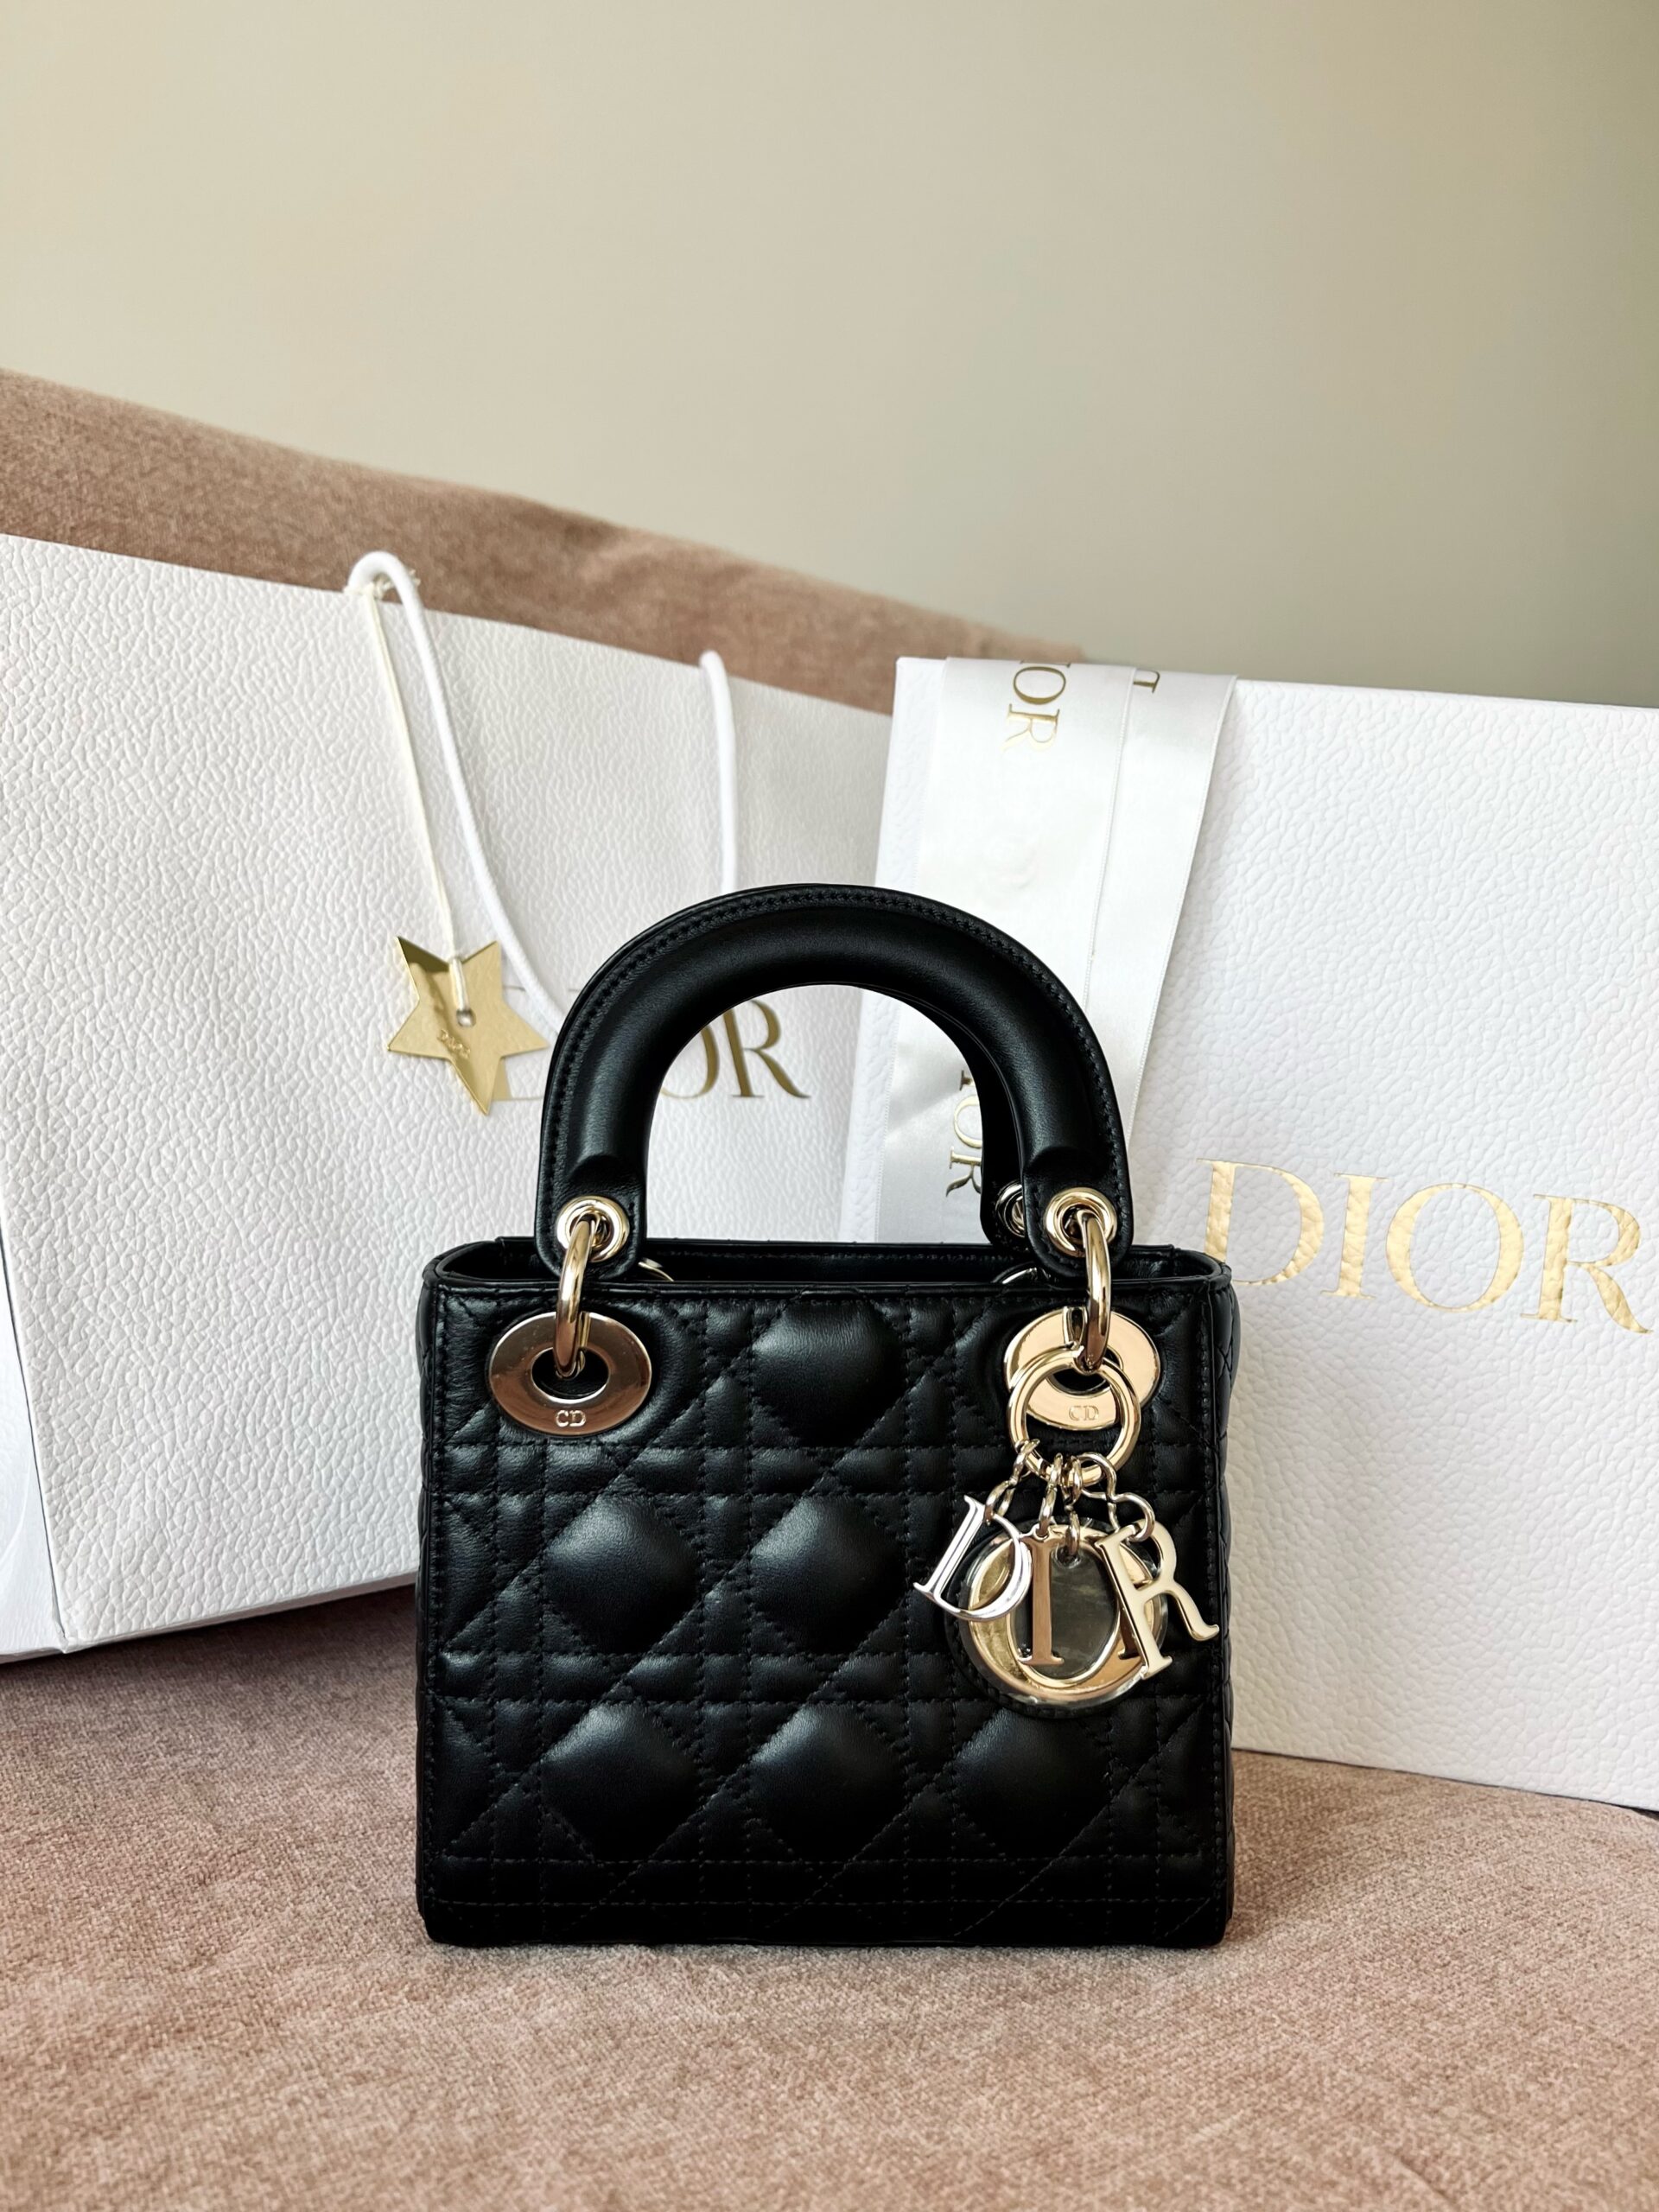 Lady dior review